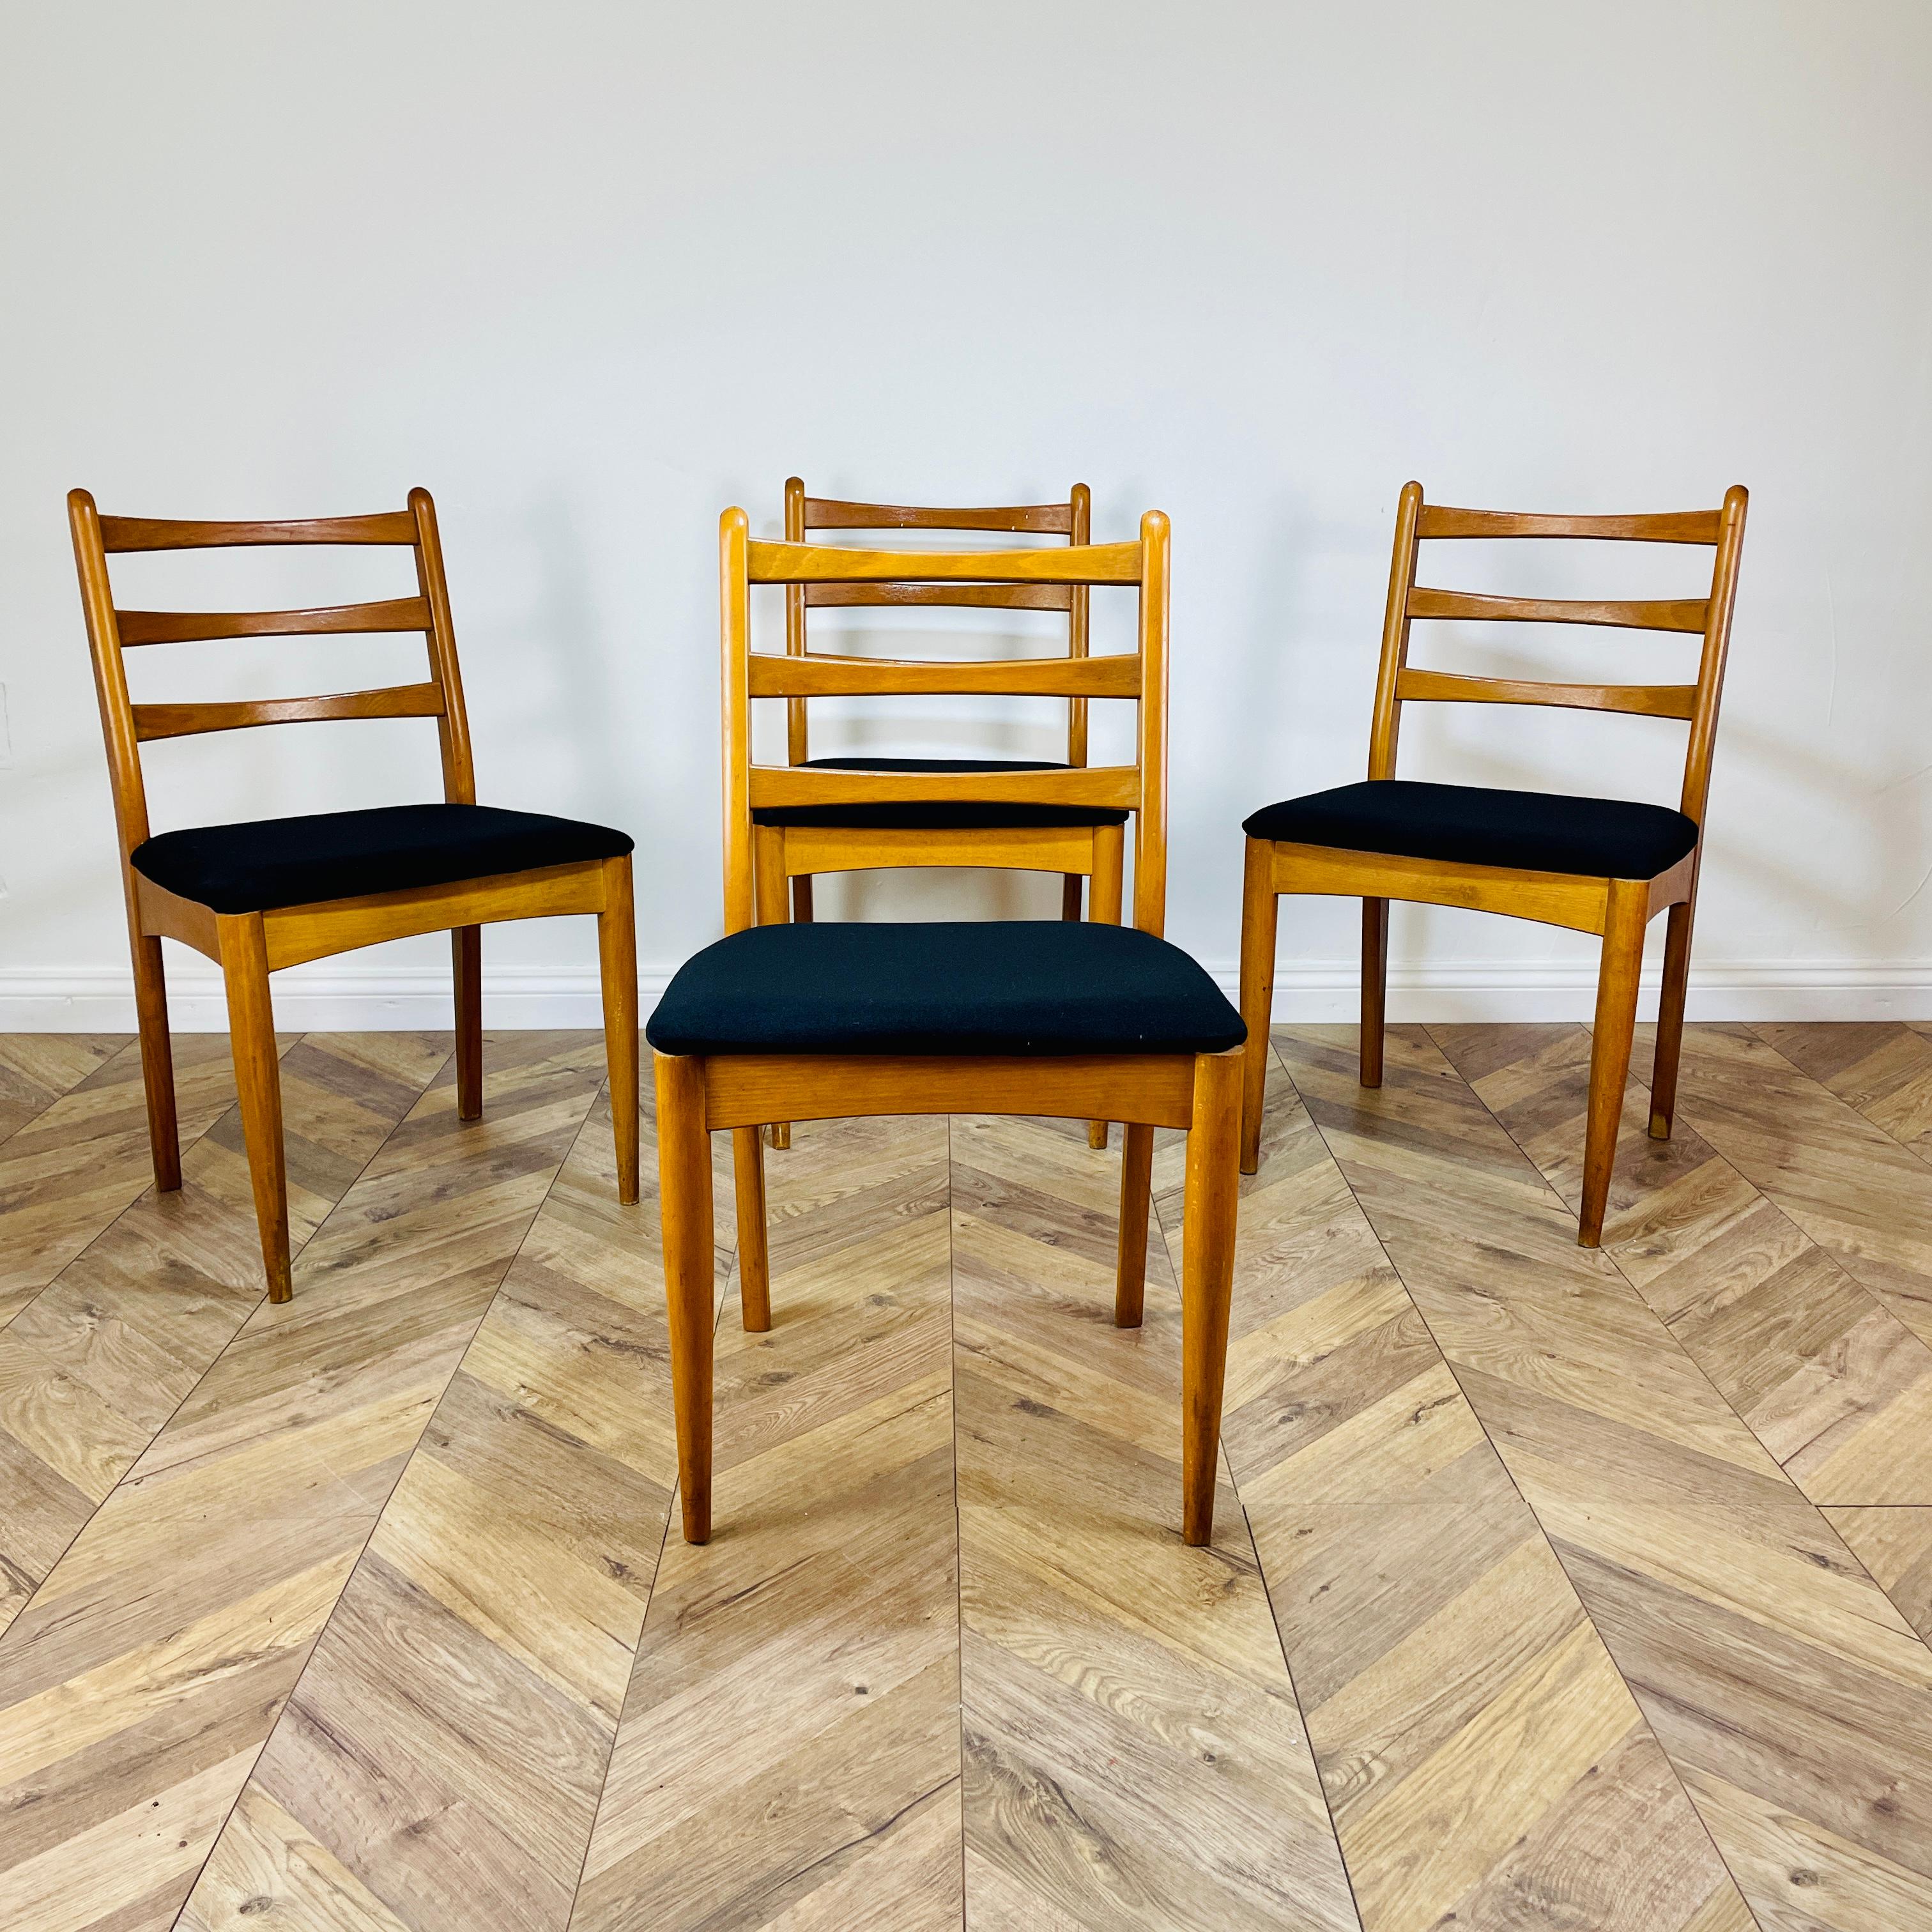 Czech Midcentury Dining Chairs by Drevounia, Set of 4